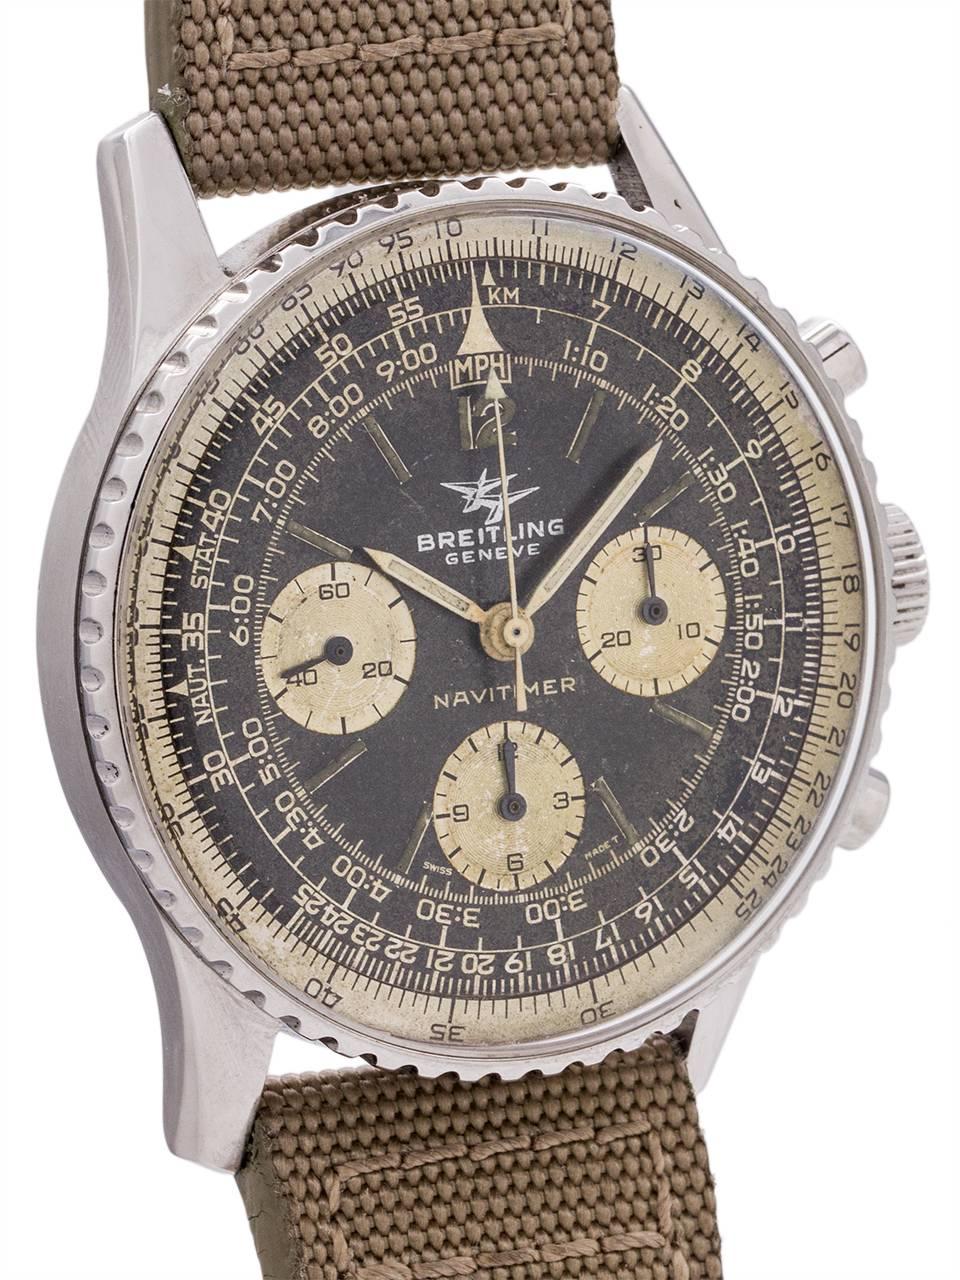 
A pleasing vintage Breitling Navitimer “Twin Jets” logo aviator’s chronograph ref 806 circa 1970’s with original matte black dial with silver gilt printing and original lumes and with some gold toning of the lacquer surface evident. Very nice